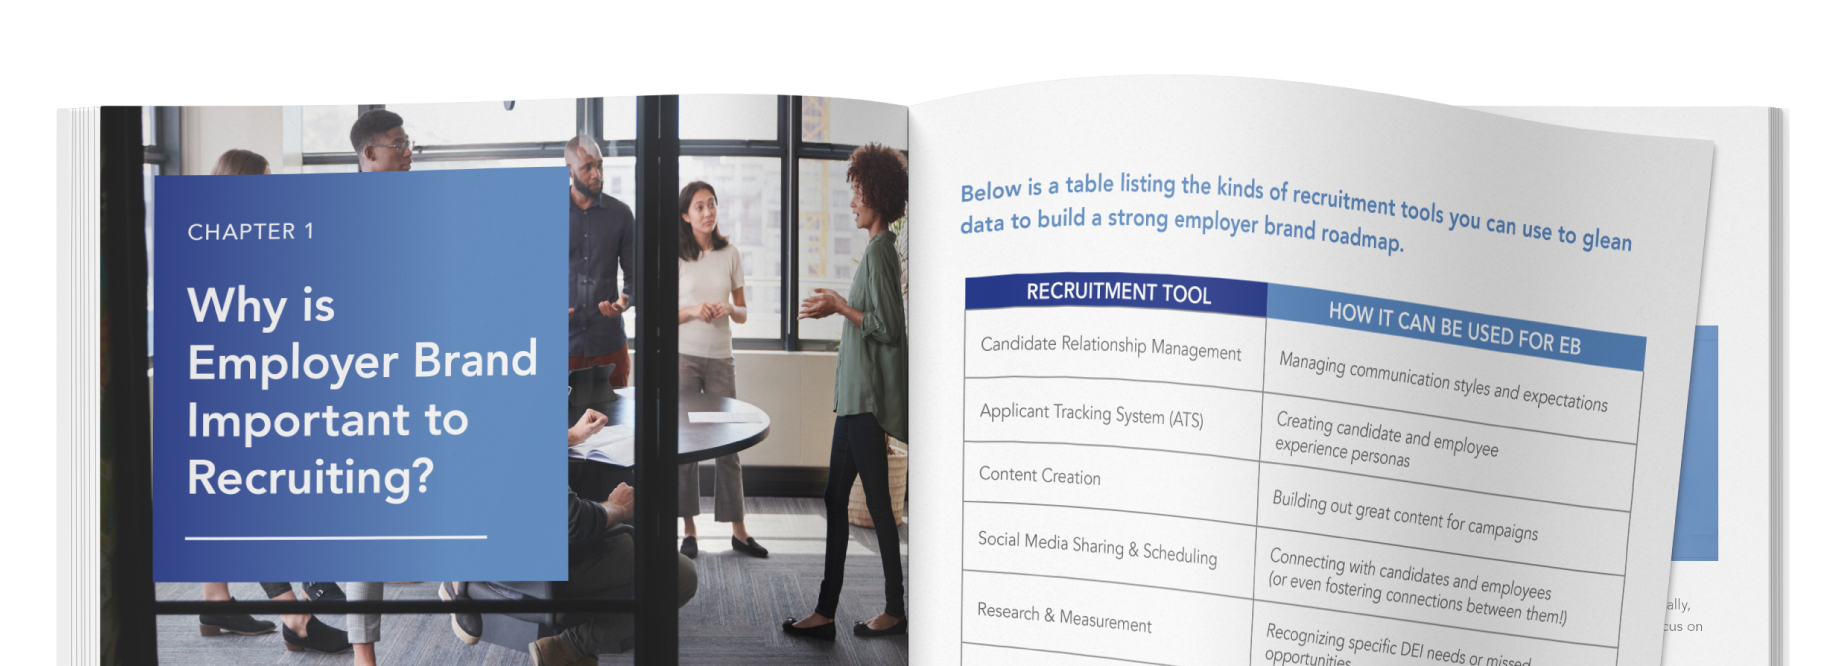 Recruiting-Tools-to-Help-You-Build-a-Strong-Employer-Brand-Mockup